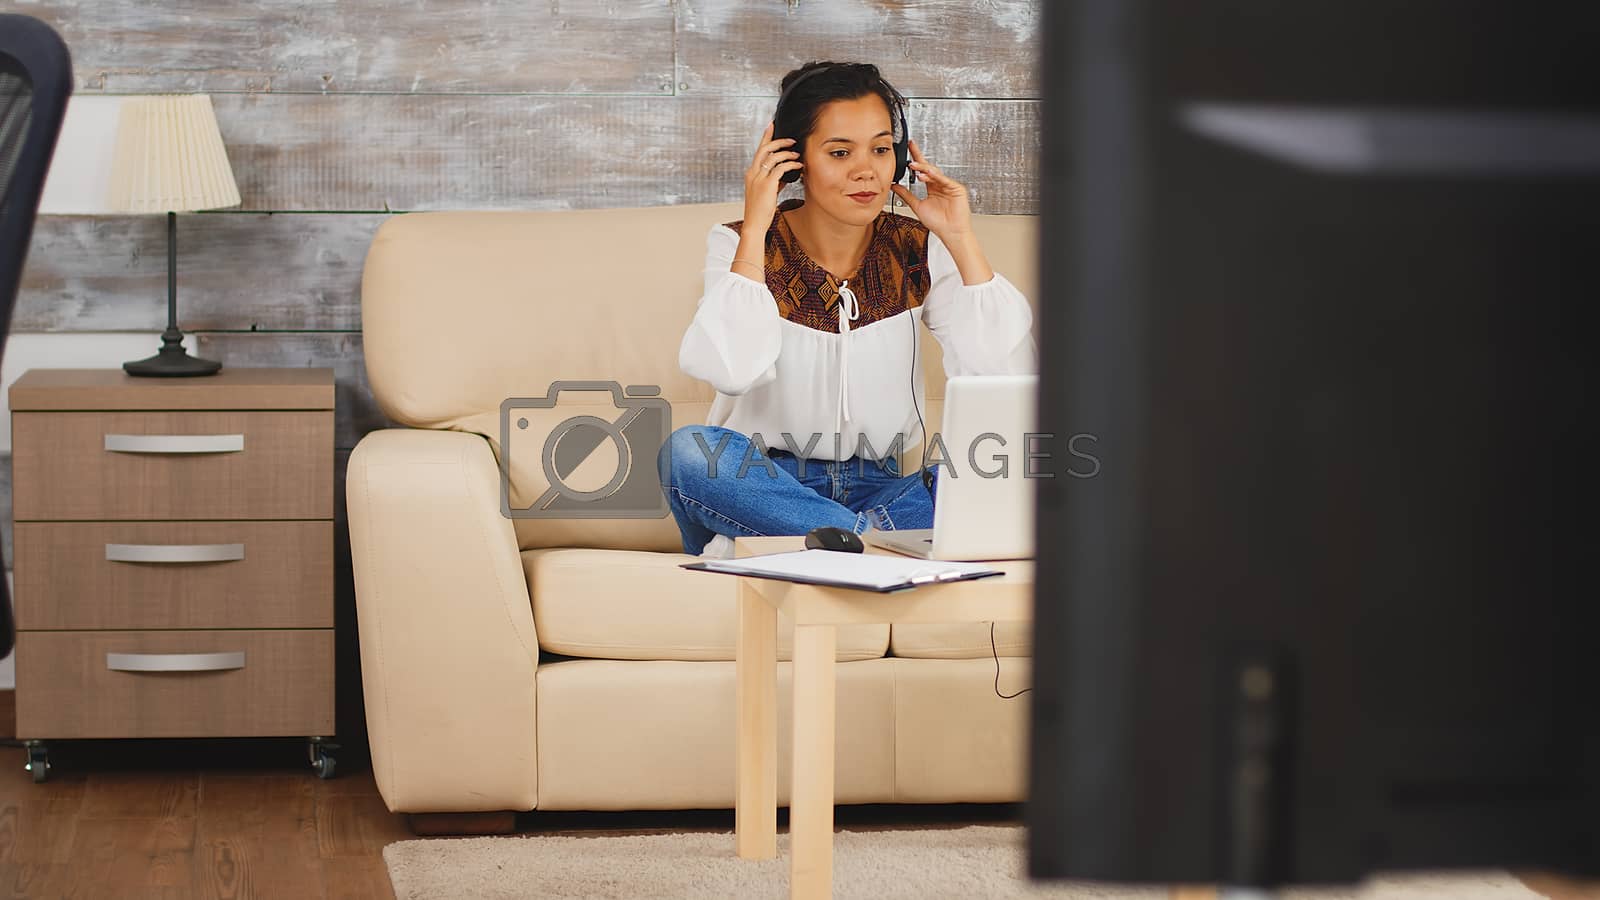 Royalty free image of Woman using headphones during a video call by DCStudio